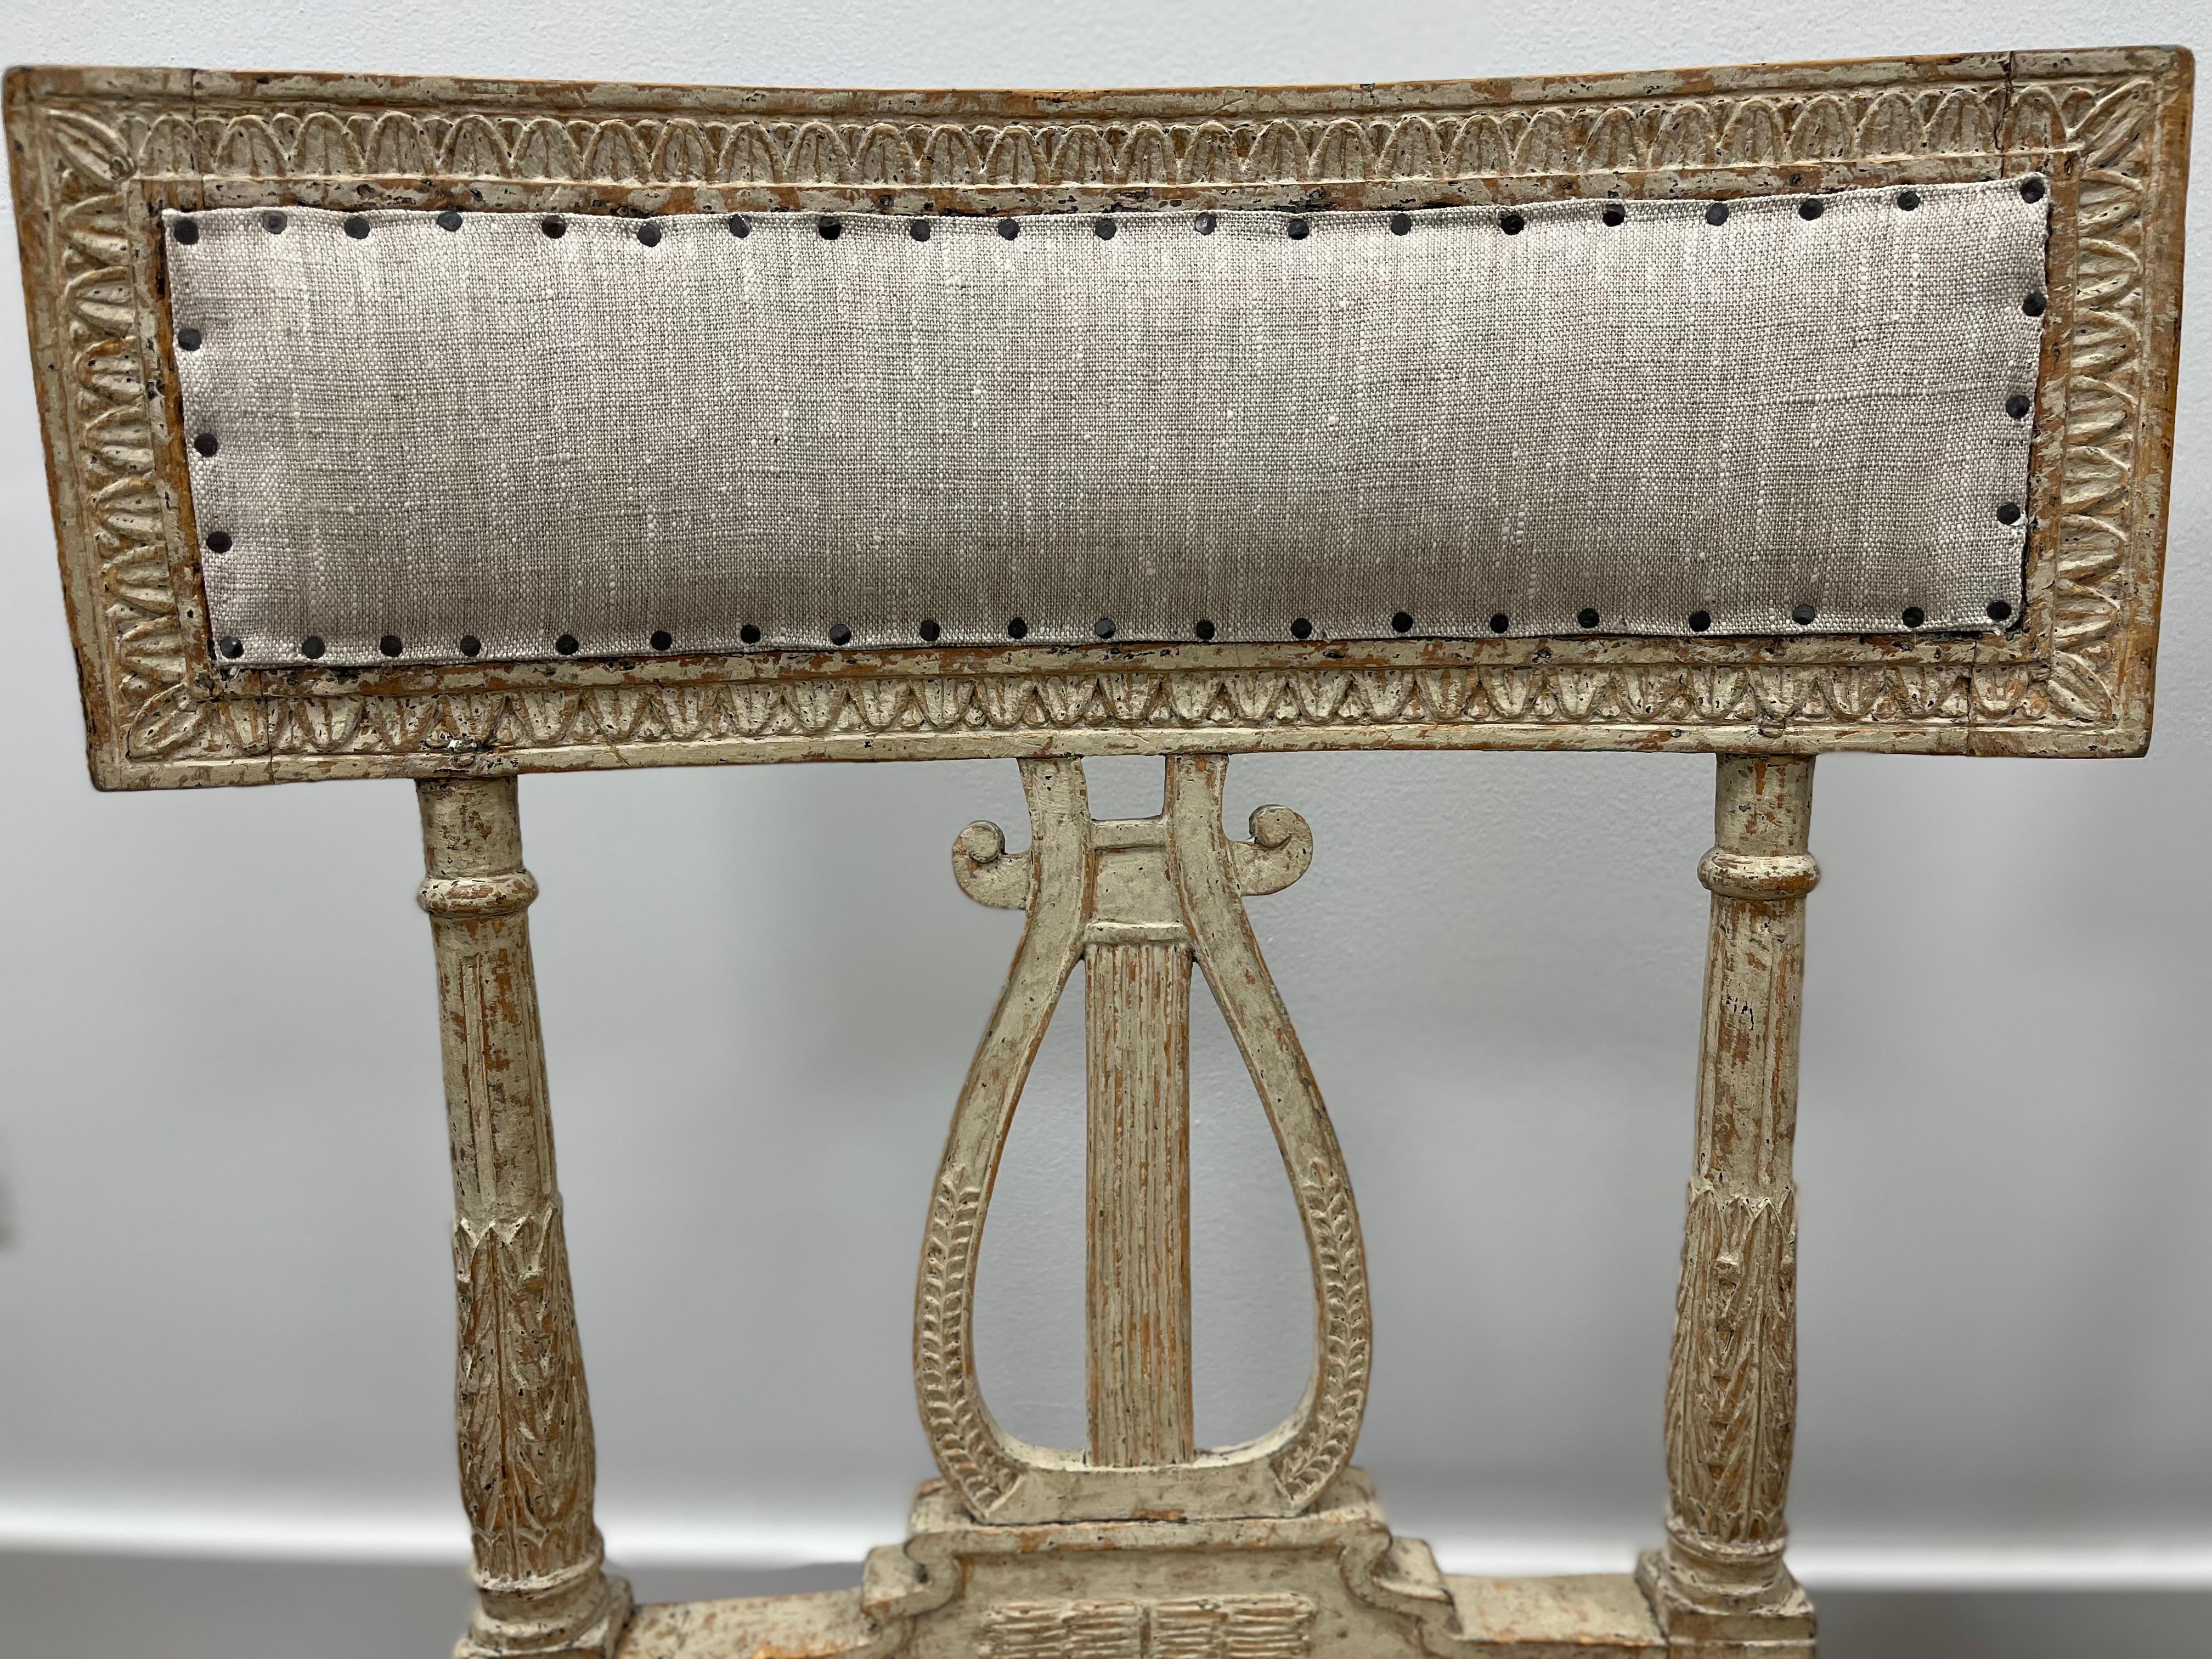 An unusual pair of intricately hand-carved provincial Swedish Gustavian Lyre chairs. Featuring decorative leaf cut raised backs atop tapered, fluted and elongated leaf cut sides and a demure harp-shaped center piece with leaf cut and reeded